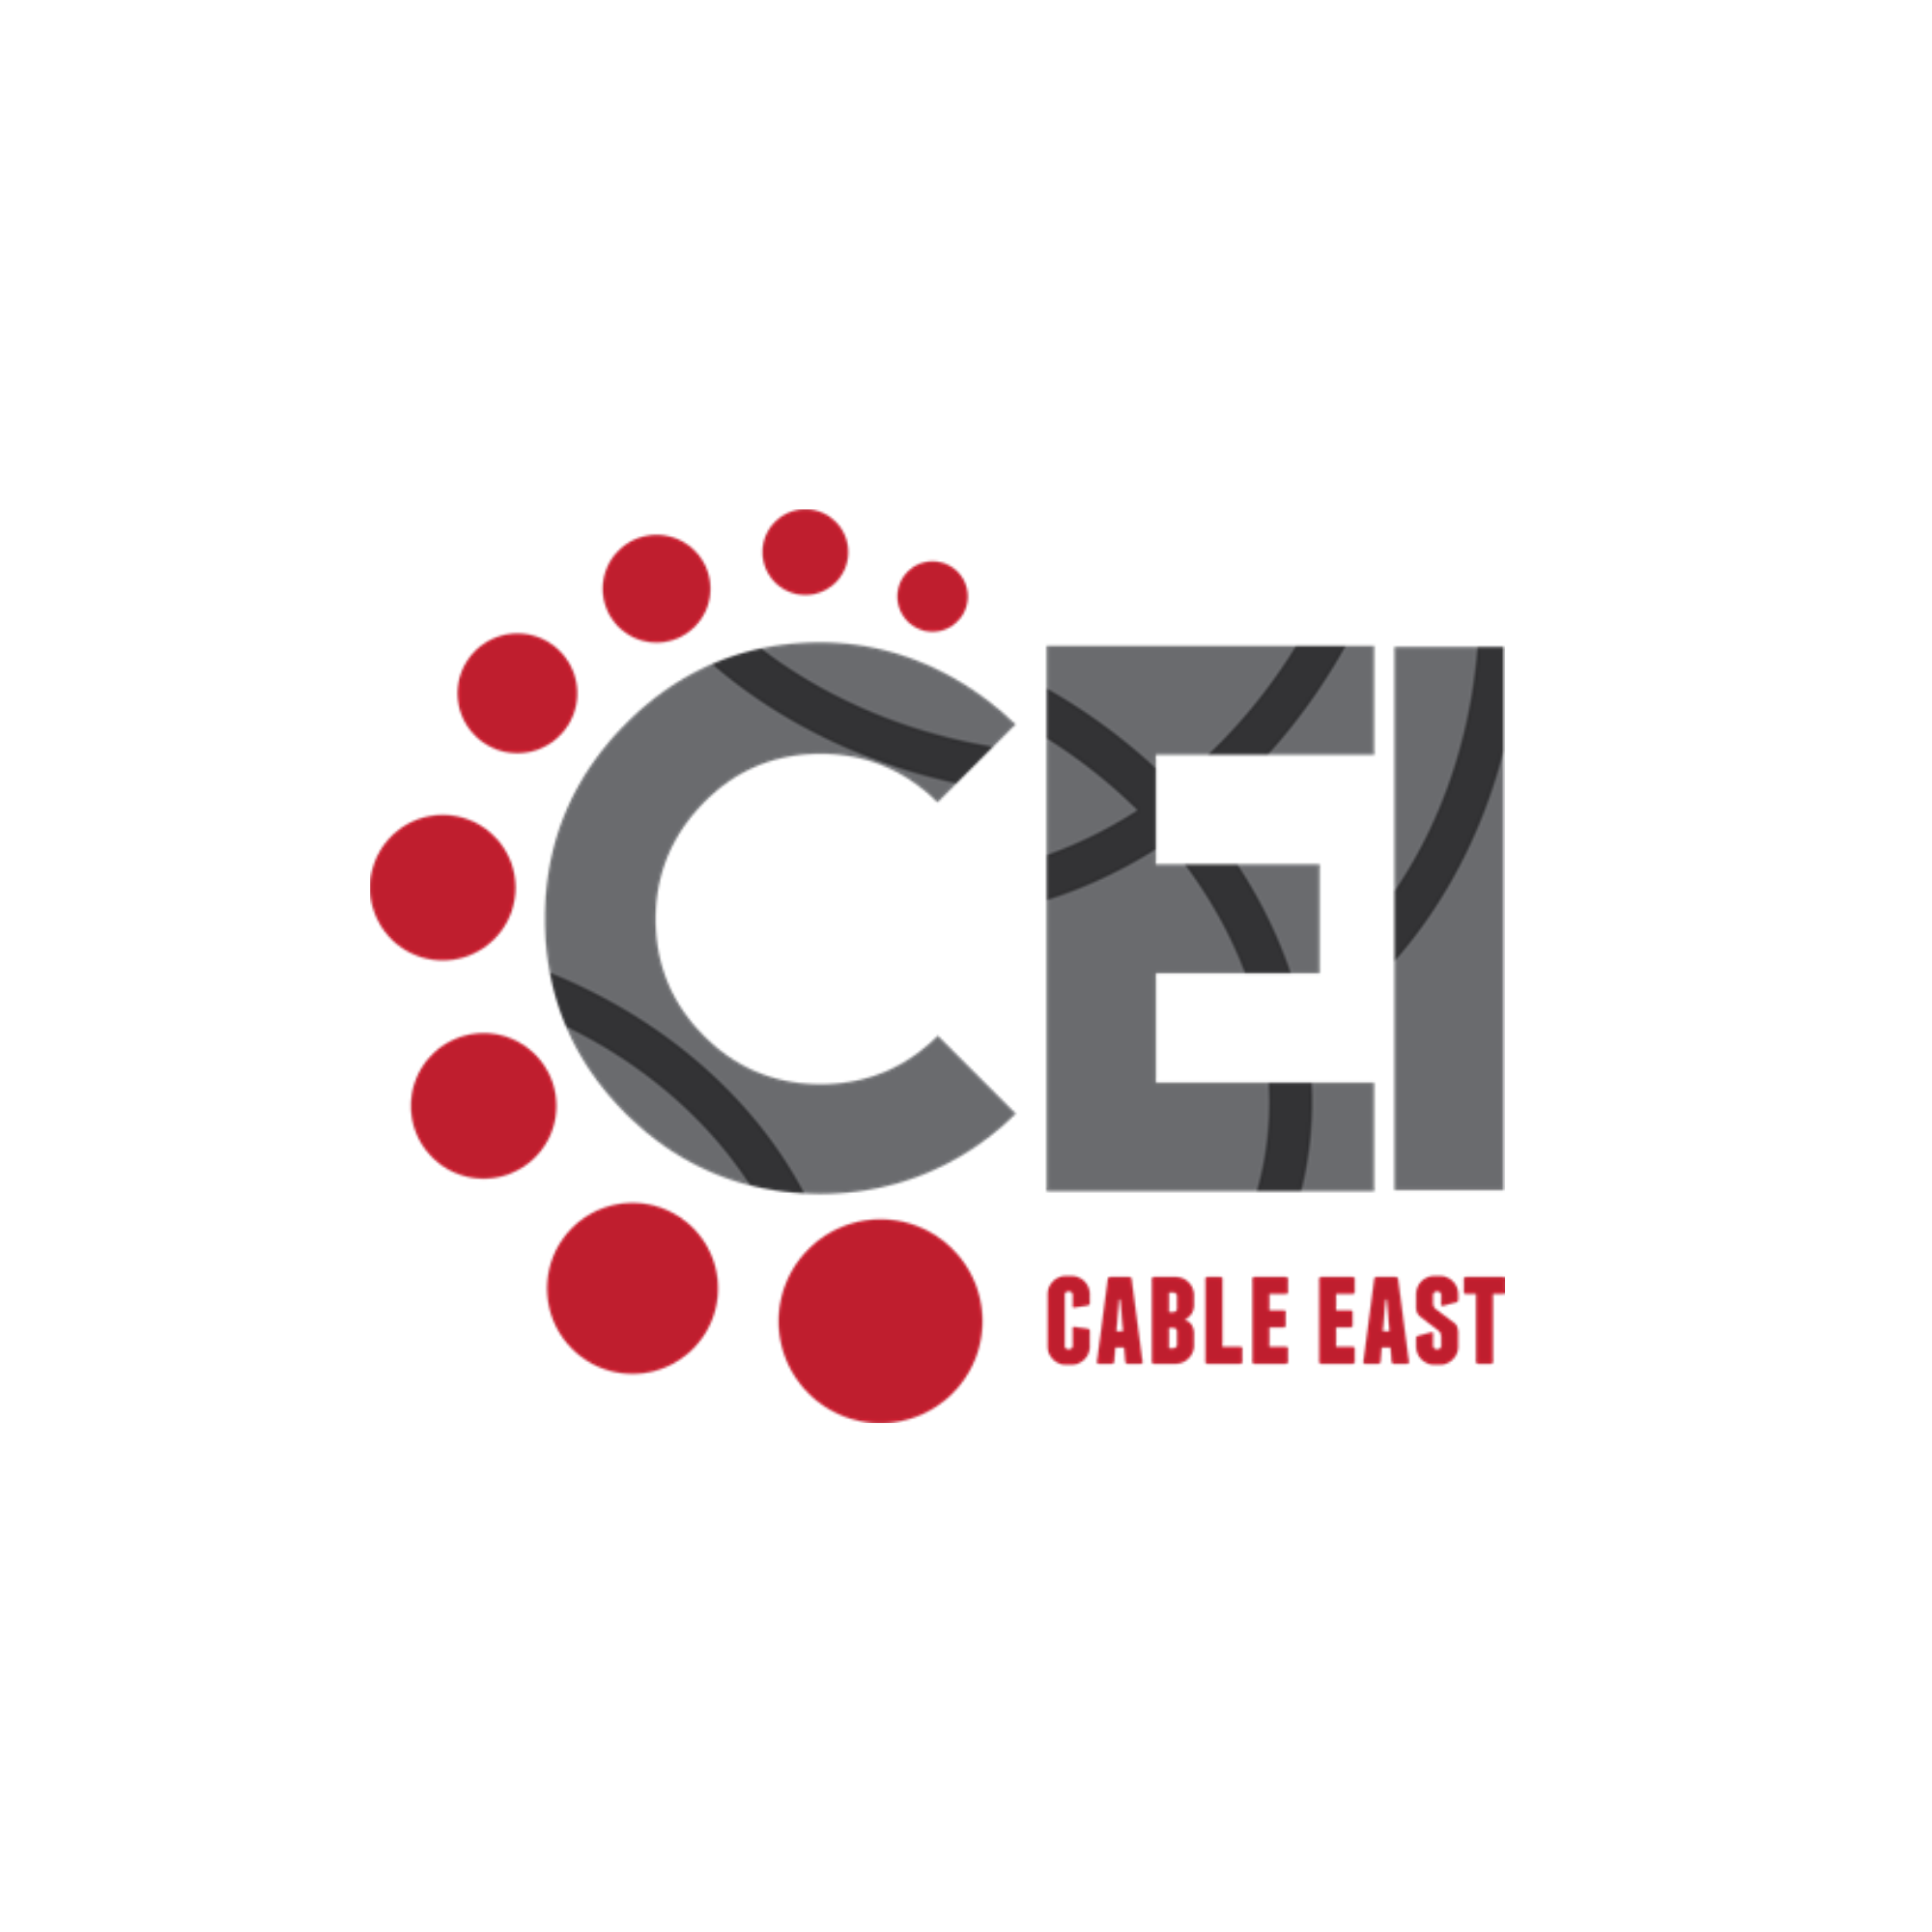 a logo with red dots and a black border for CEI